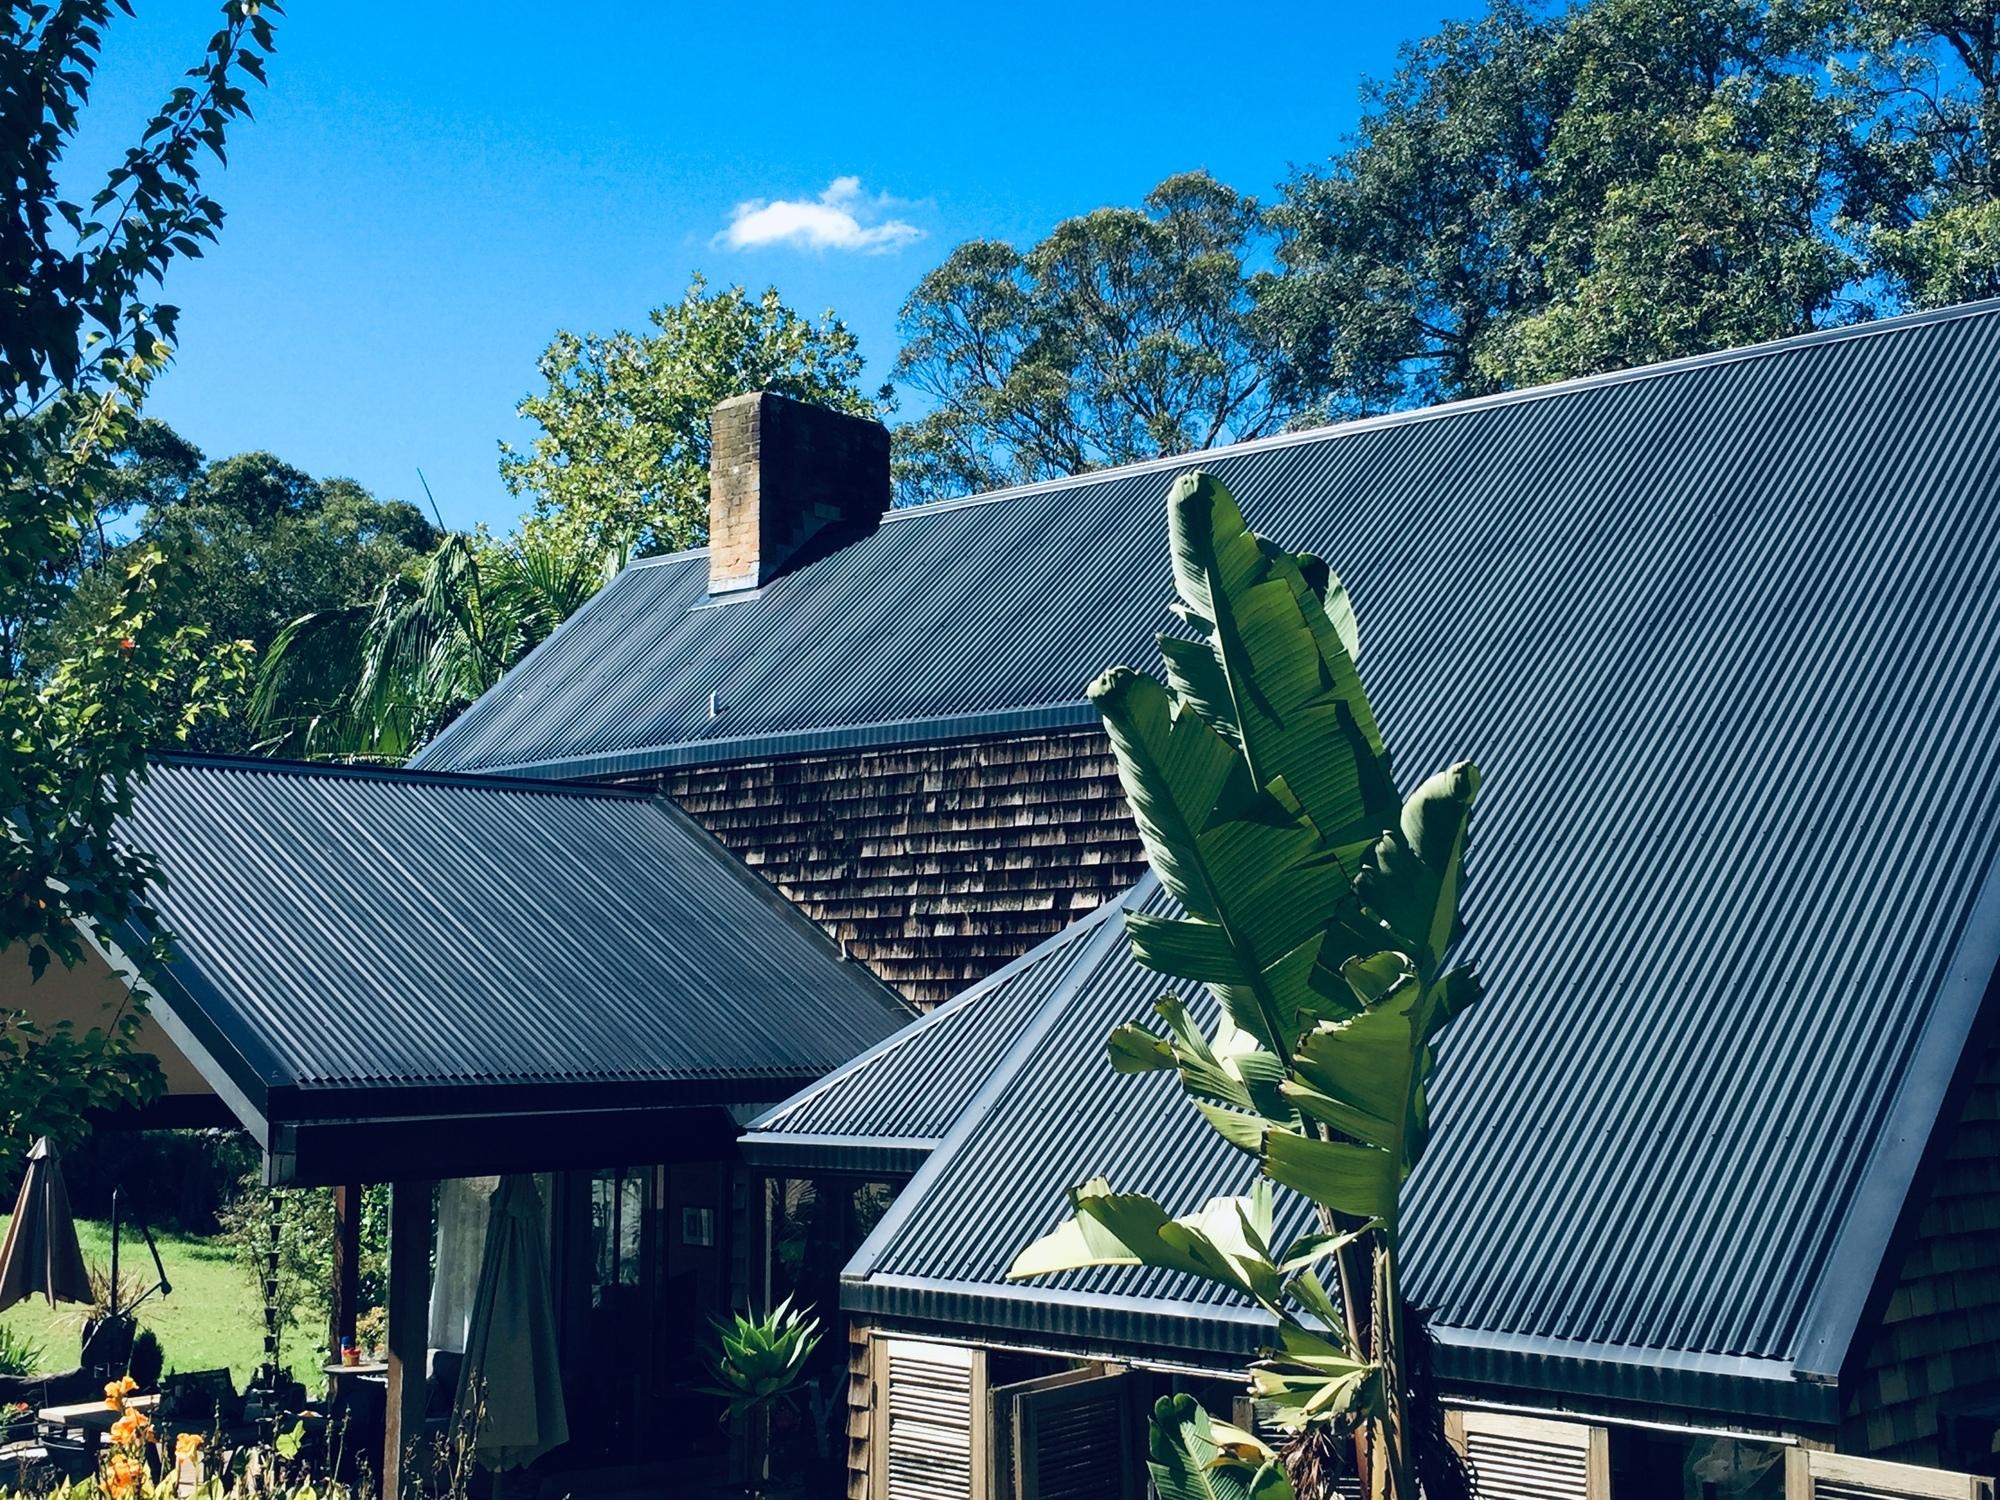 Roslyn from Galston, NSW loves COLORBOND® steel. Roofing, Guttering & Fascia, Patio & Pergola made from COLORBOND® steel in the colour Monument®